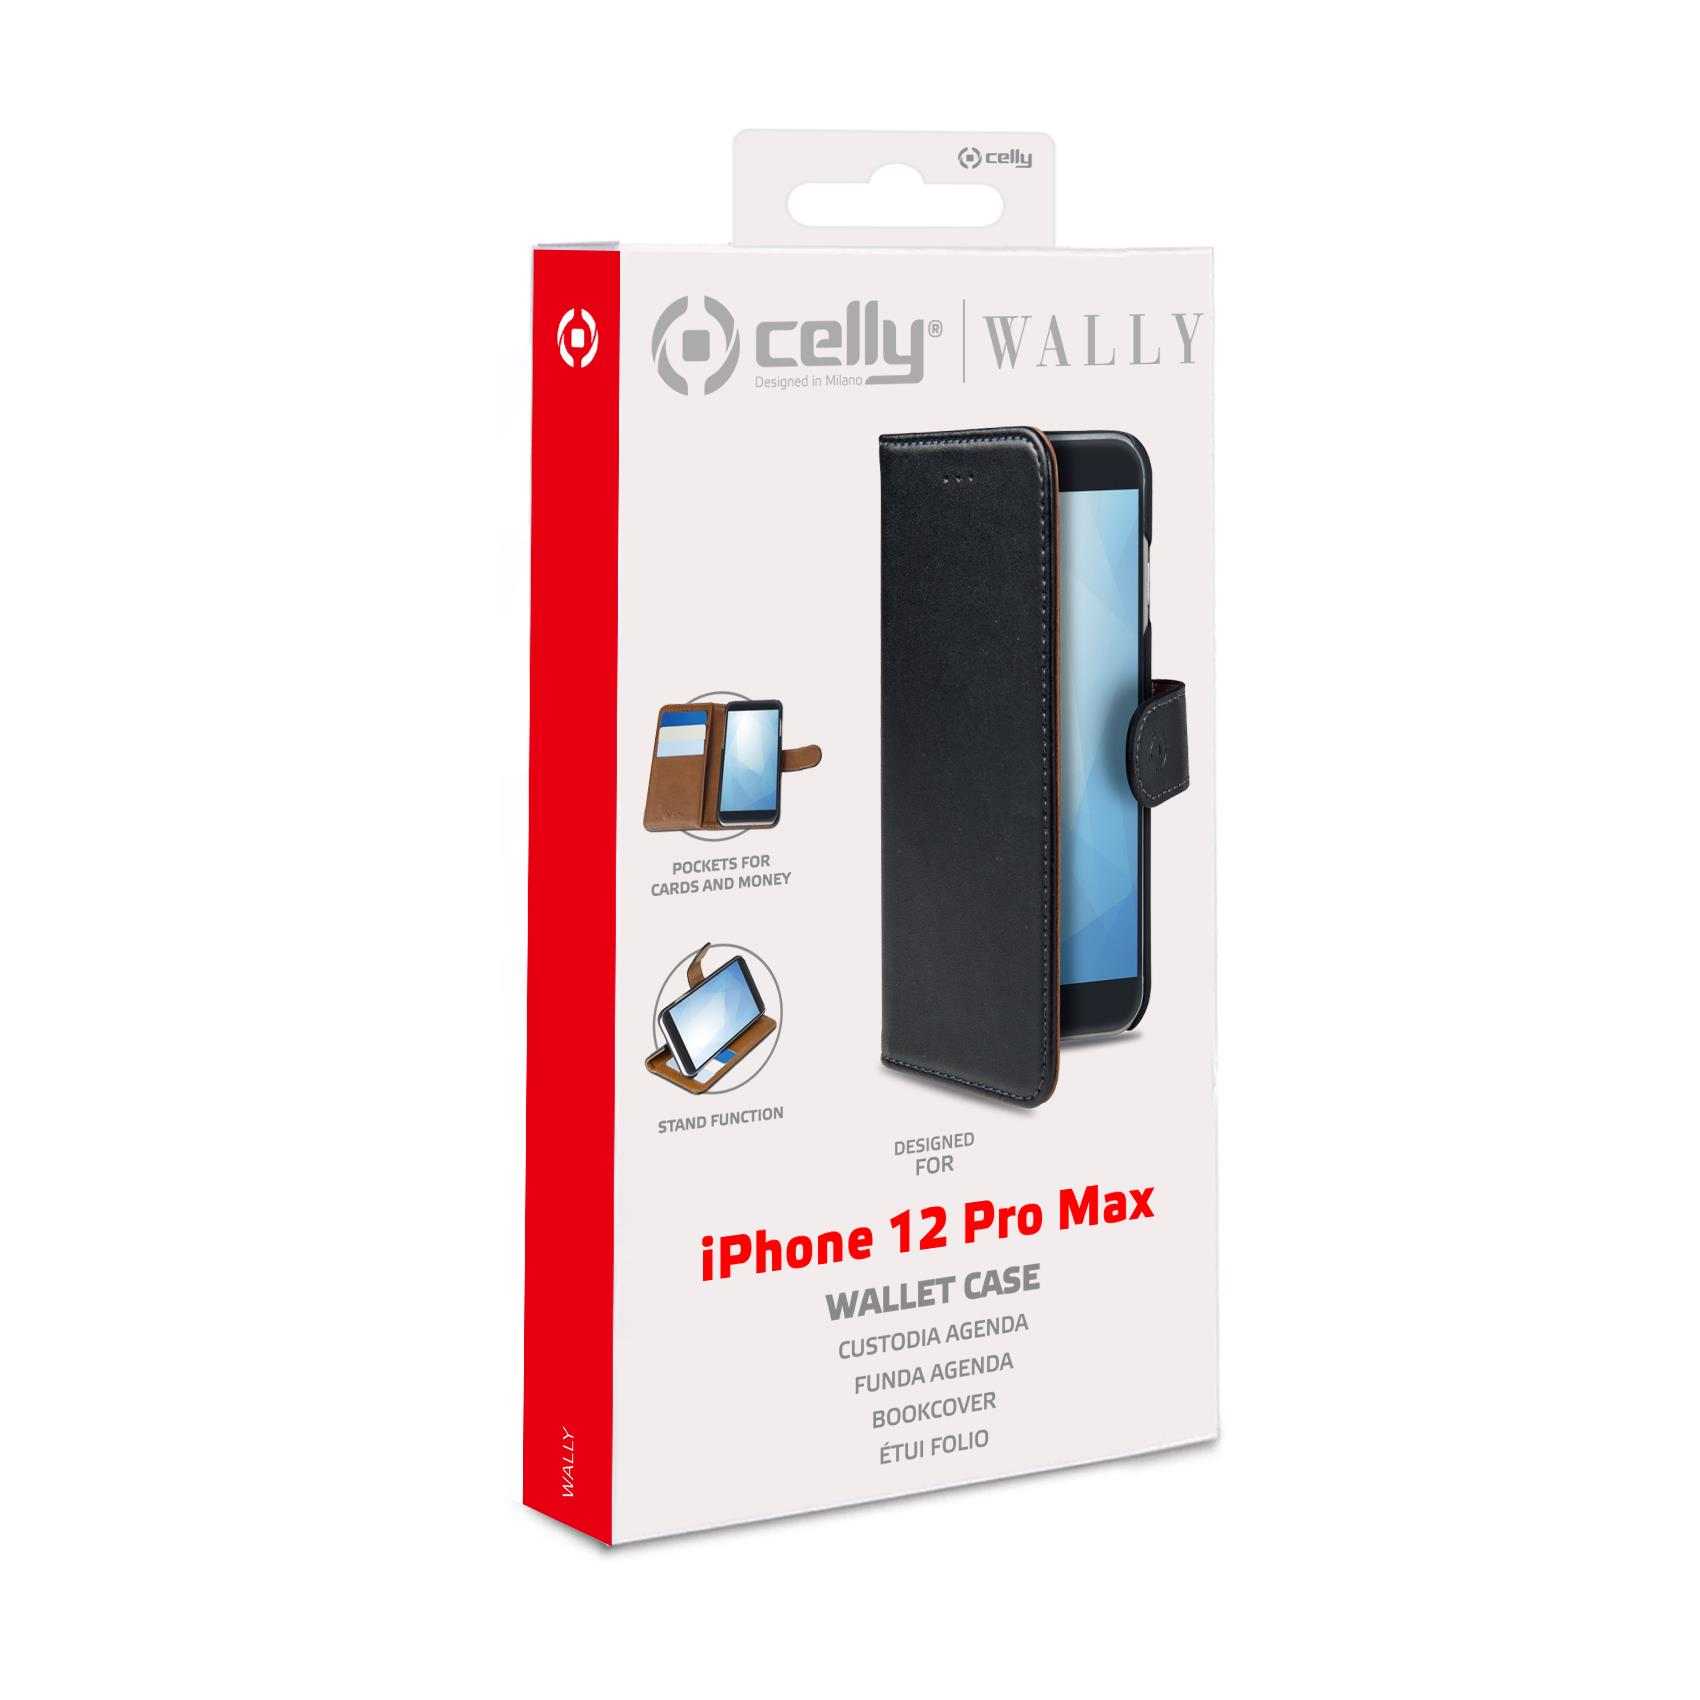 Wally Case Iphone 12 Pro Max Black Celly Wally1005 8021735761204